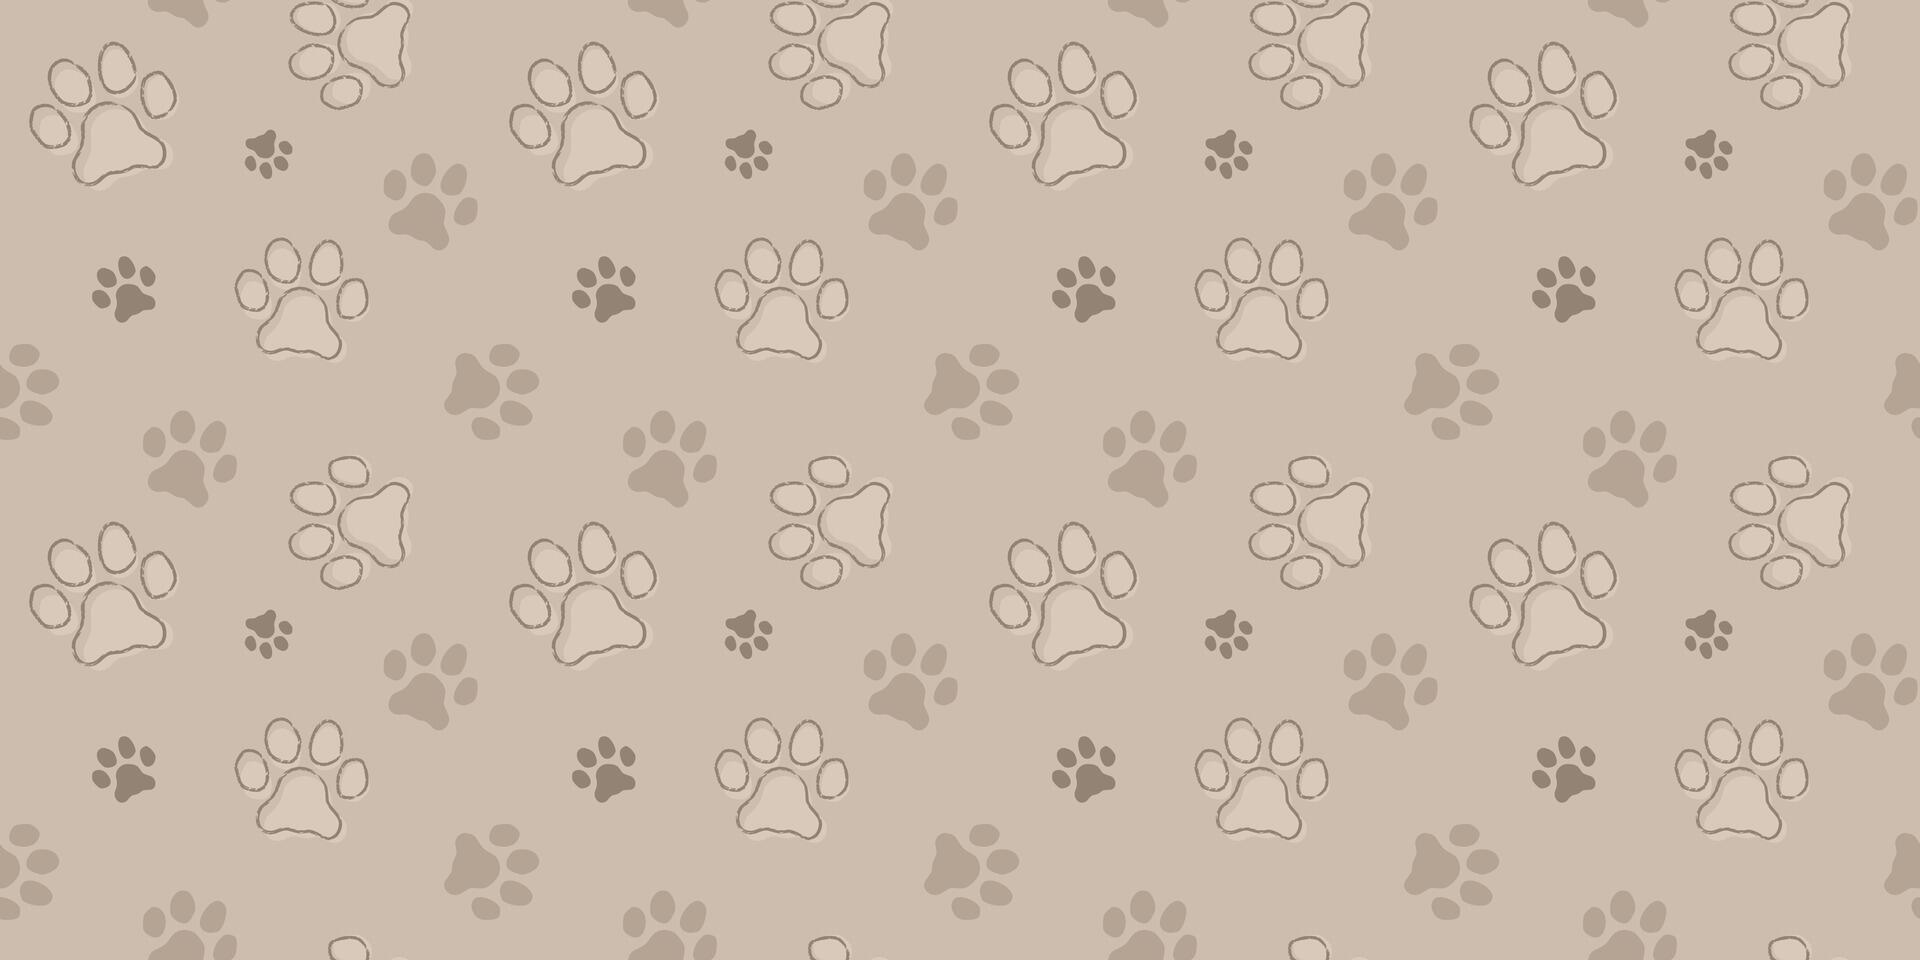 Paw animal seamless pattern. Hand drawn doodle print silhouettes with outline elements. Vector illustration